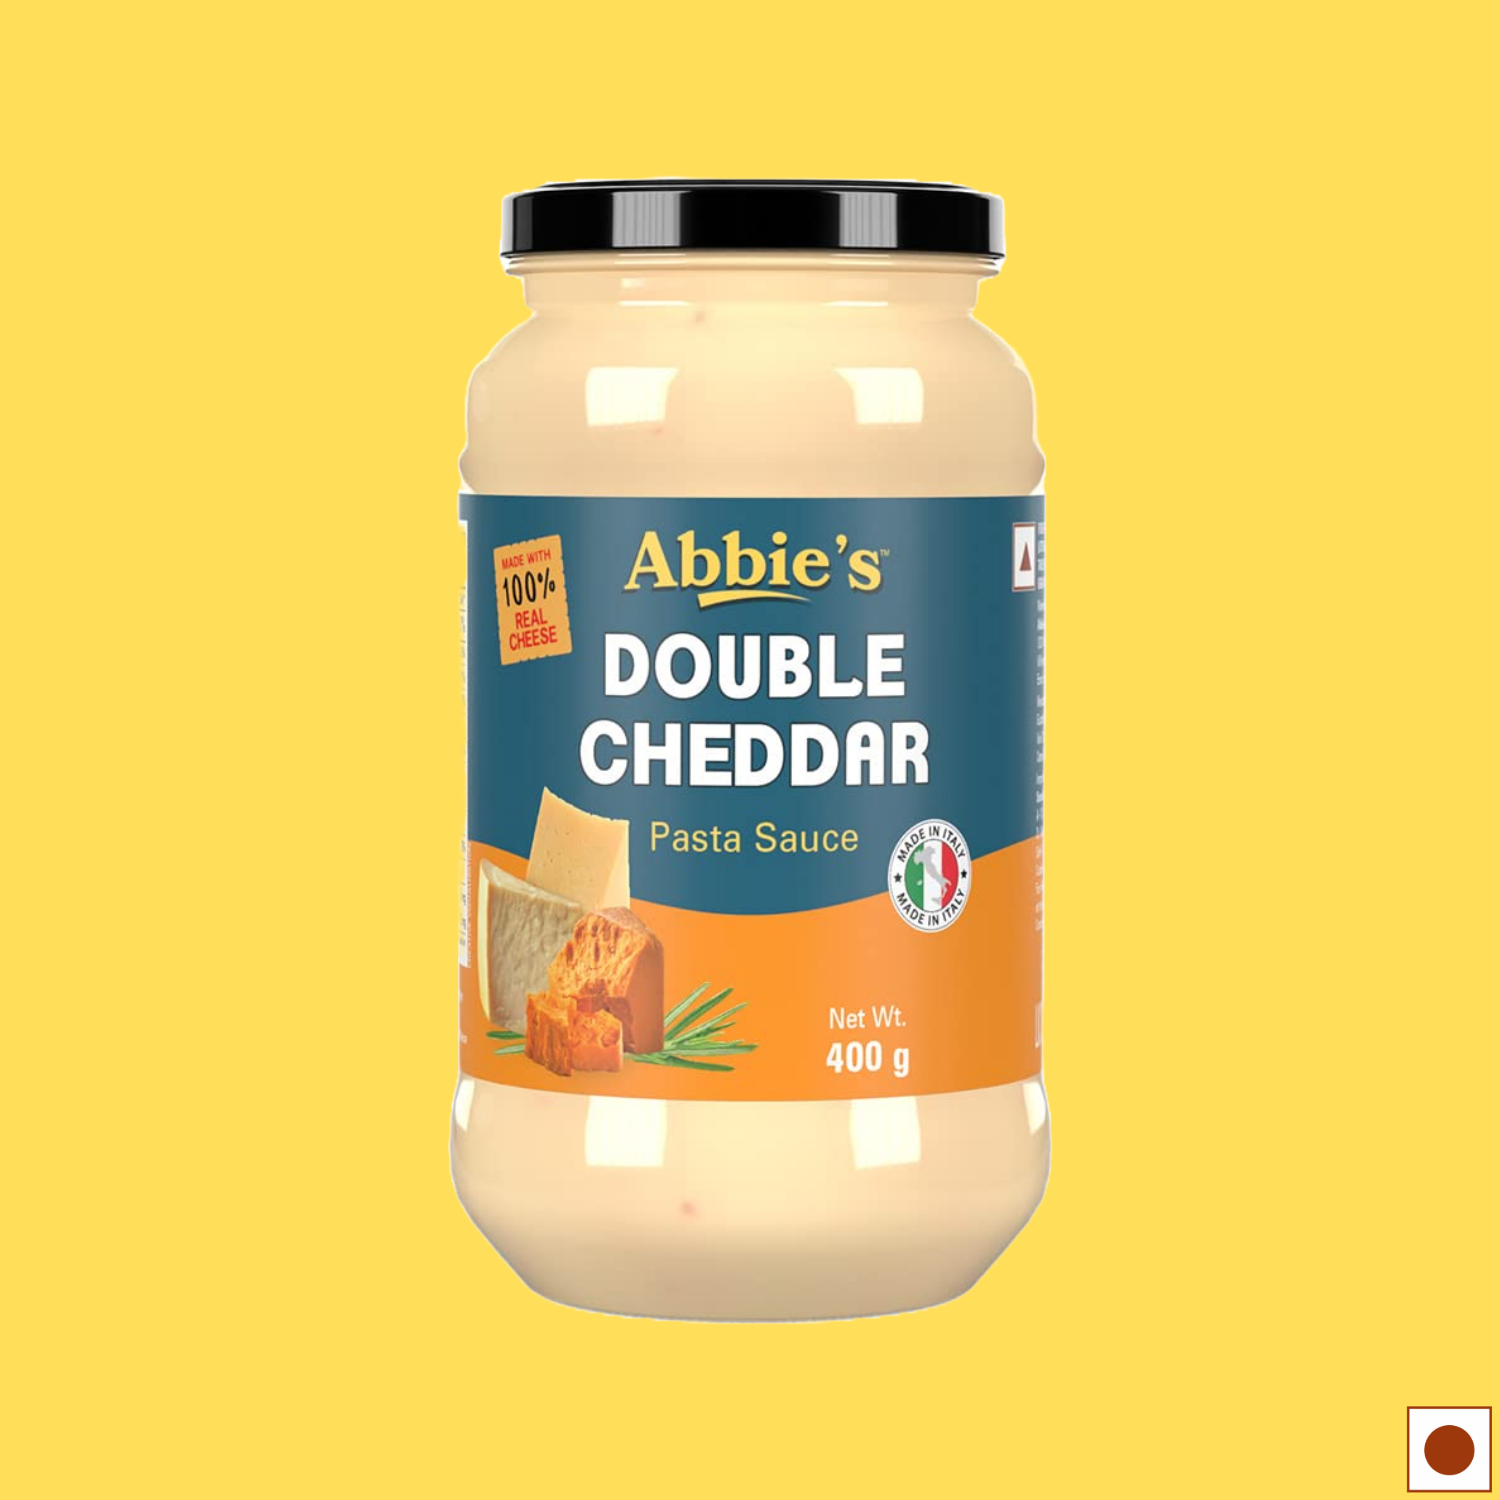 Abbie's Double Cheddar Pasta Sauce, 400g (Imported)